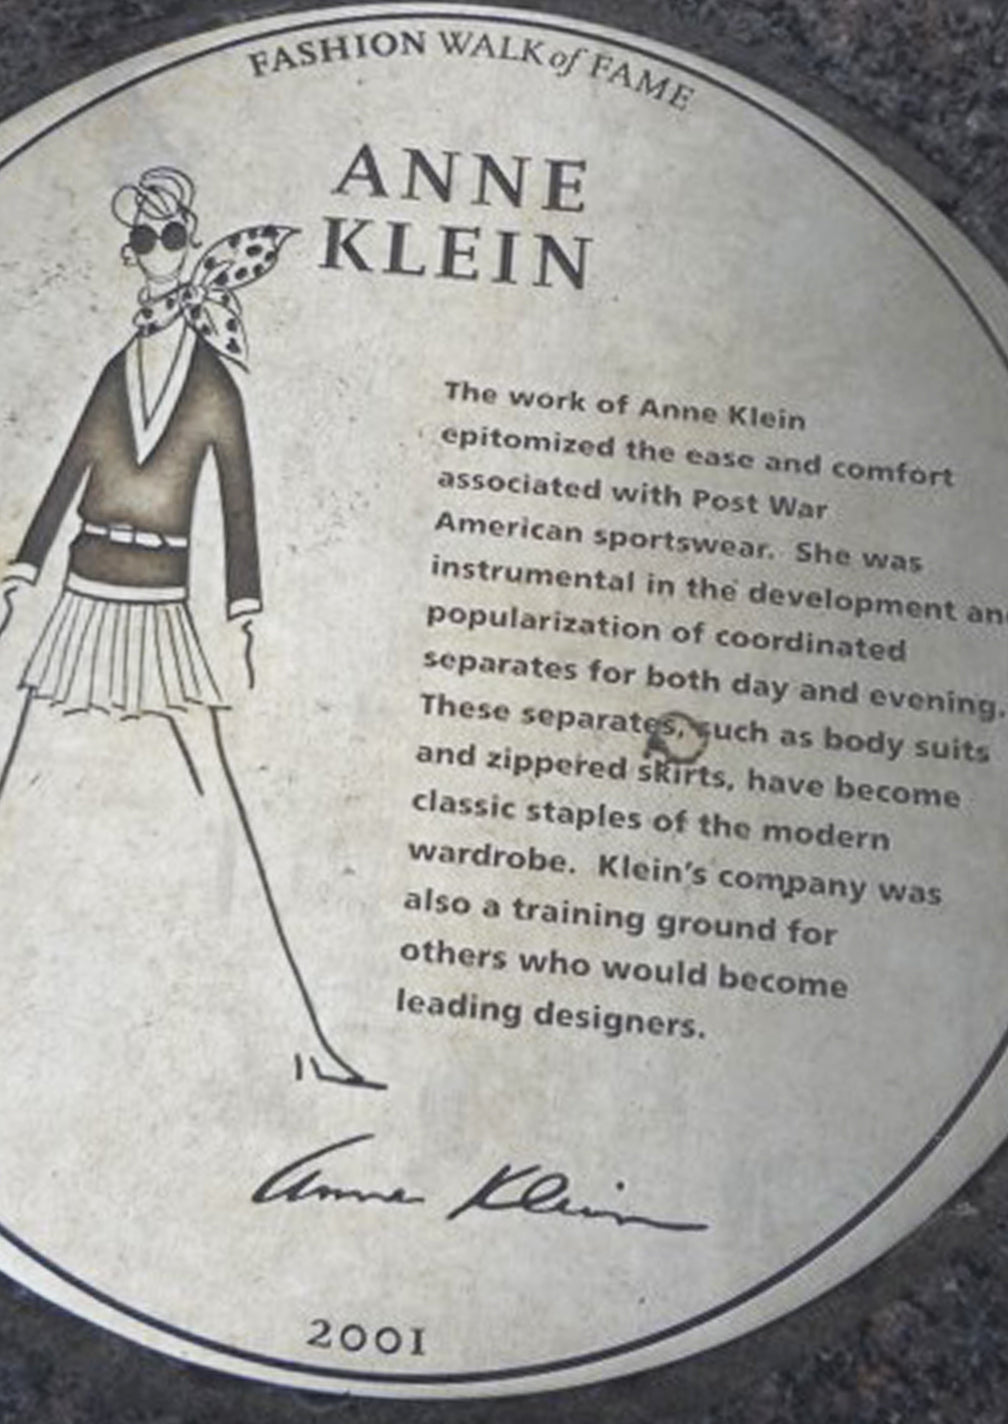 Anne Klein: The Legendary Designer Who Changed The Way American